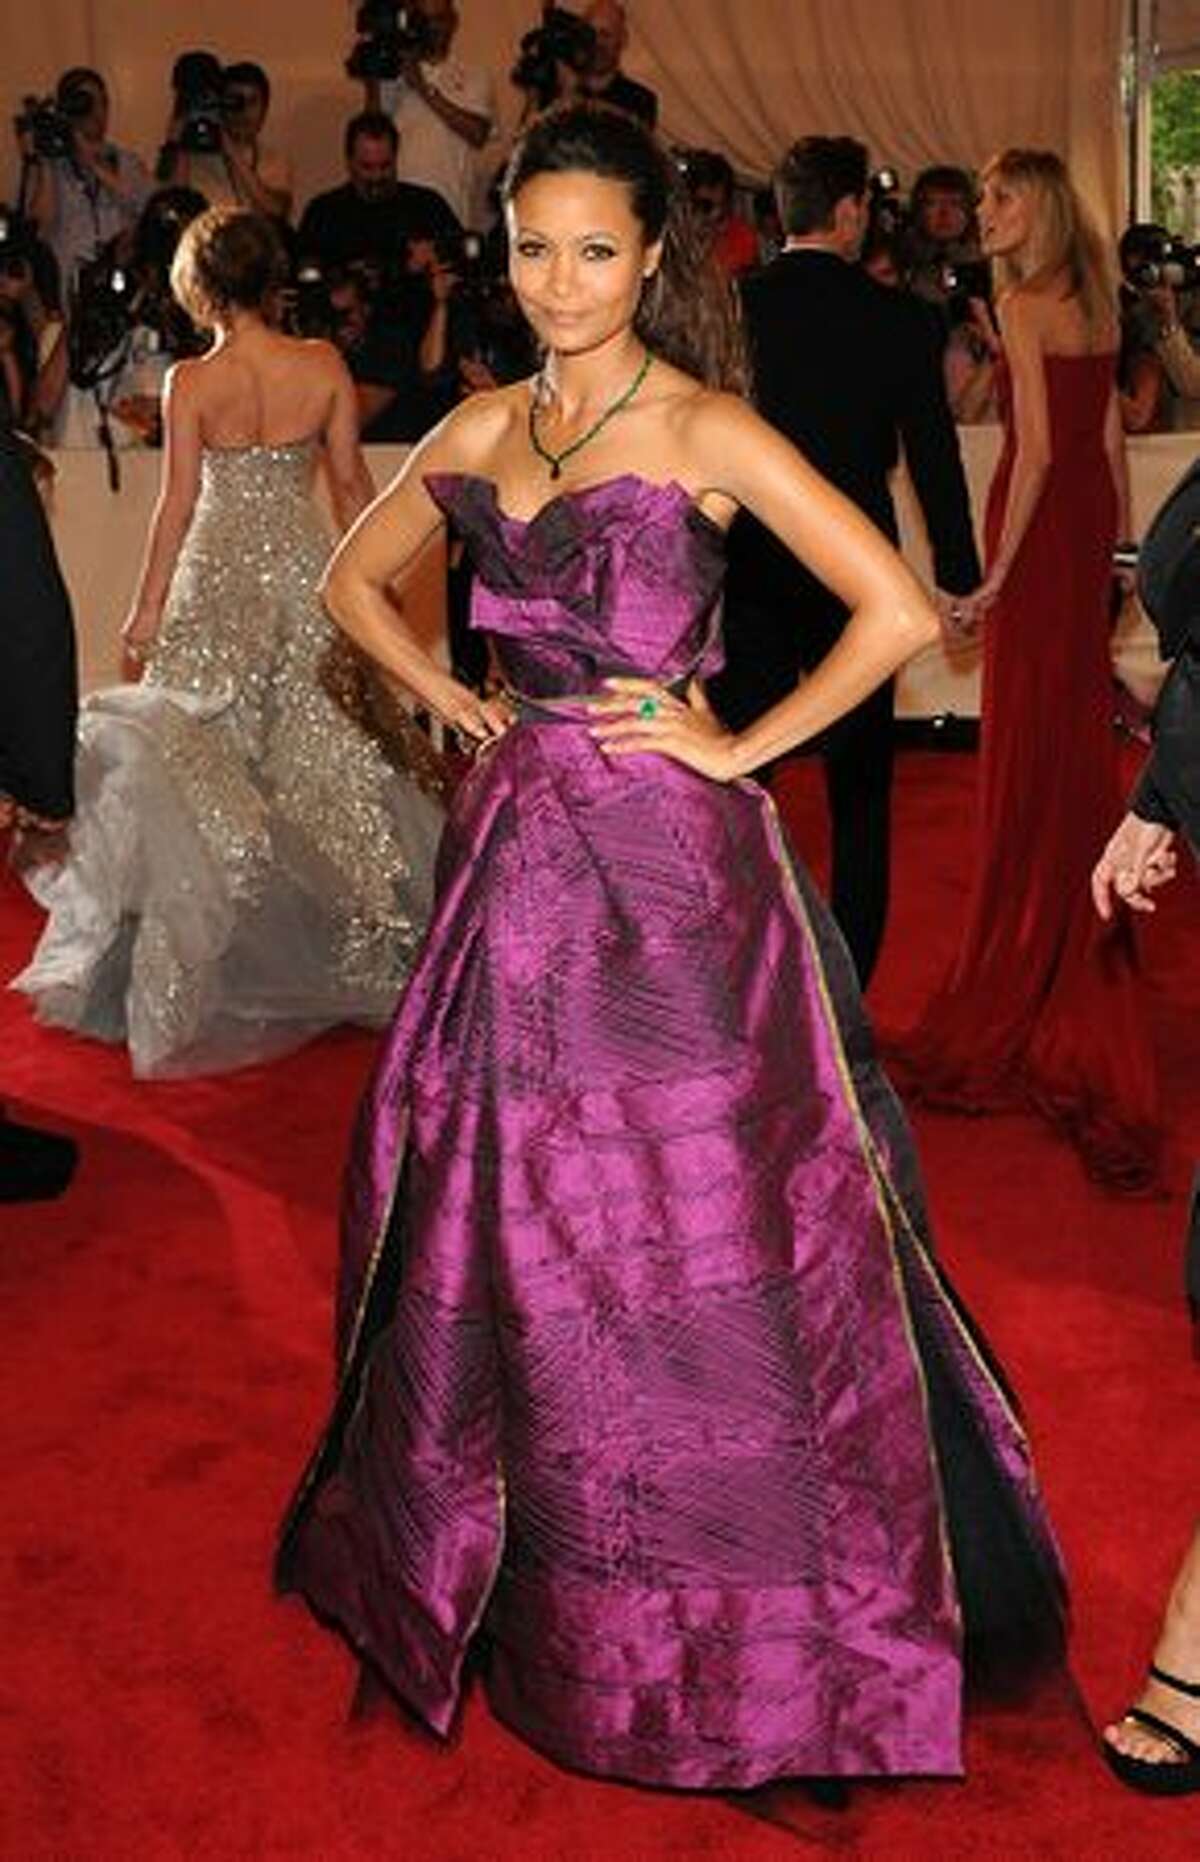 Actress Thandie Newton takes a dare in a Vivienne Westwood gown and pulls it off. This is not a color that works for many, but whoever chose it for her knew what they were doing.